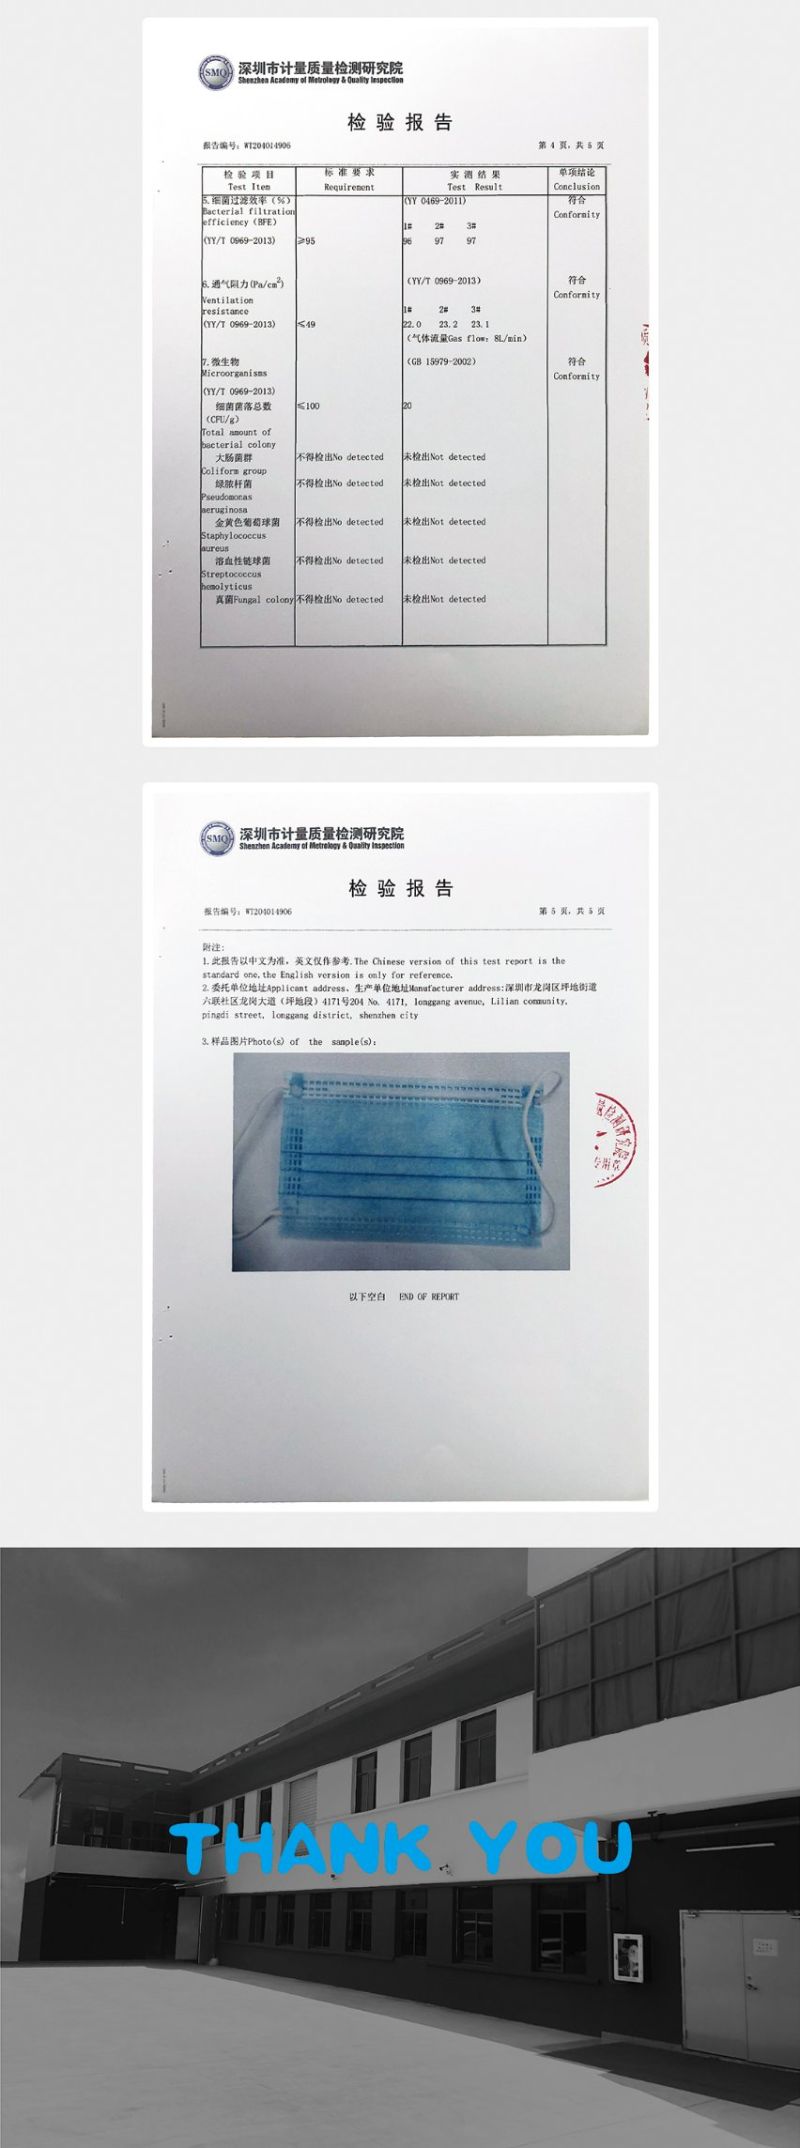 Hot Sale Disposable Mask, 3-Layer Masks, Anti Dust Breathable Disposable Ear Loop Mouth Blue Face Mask Soft Lining and Ear Loops